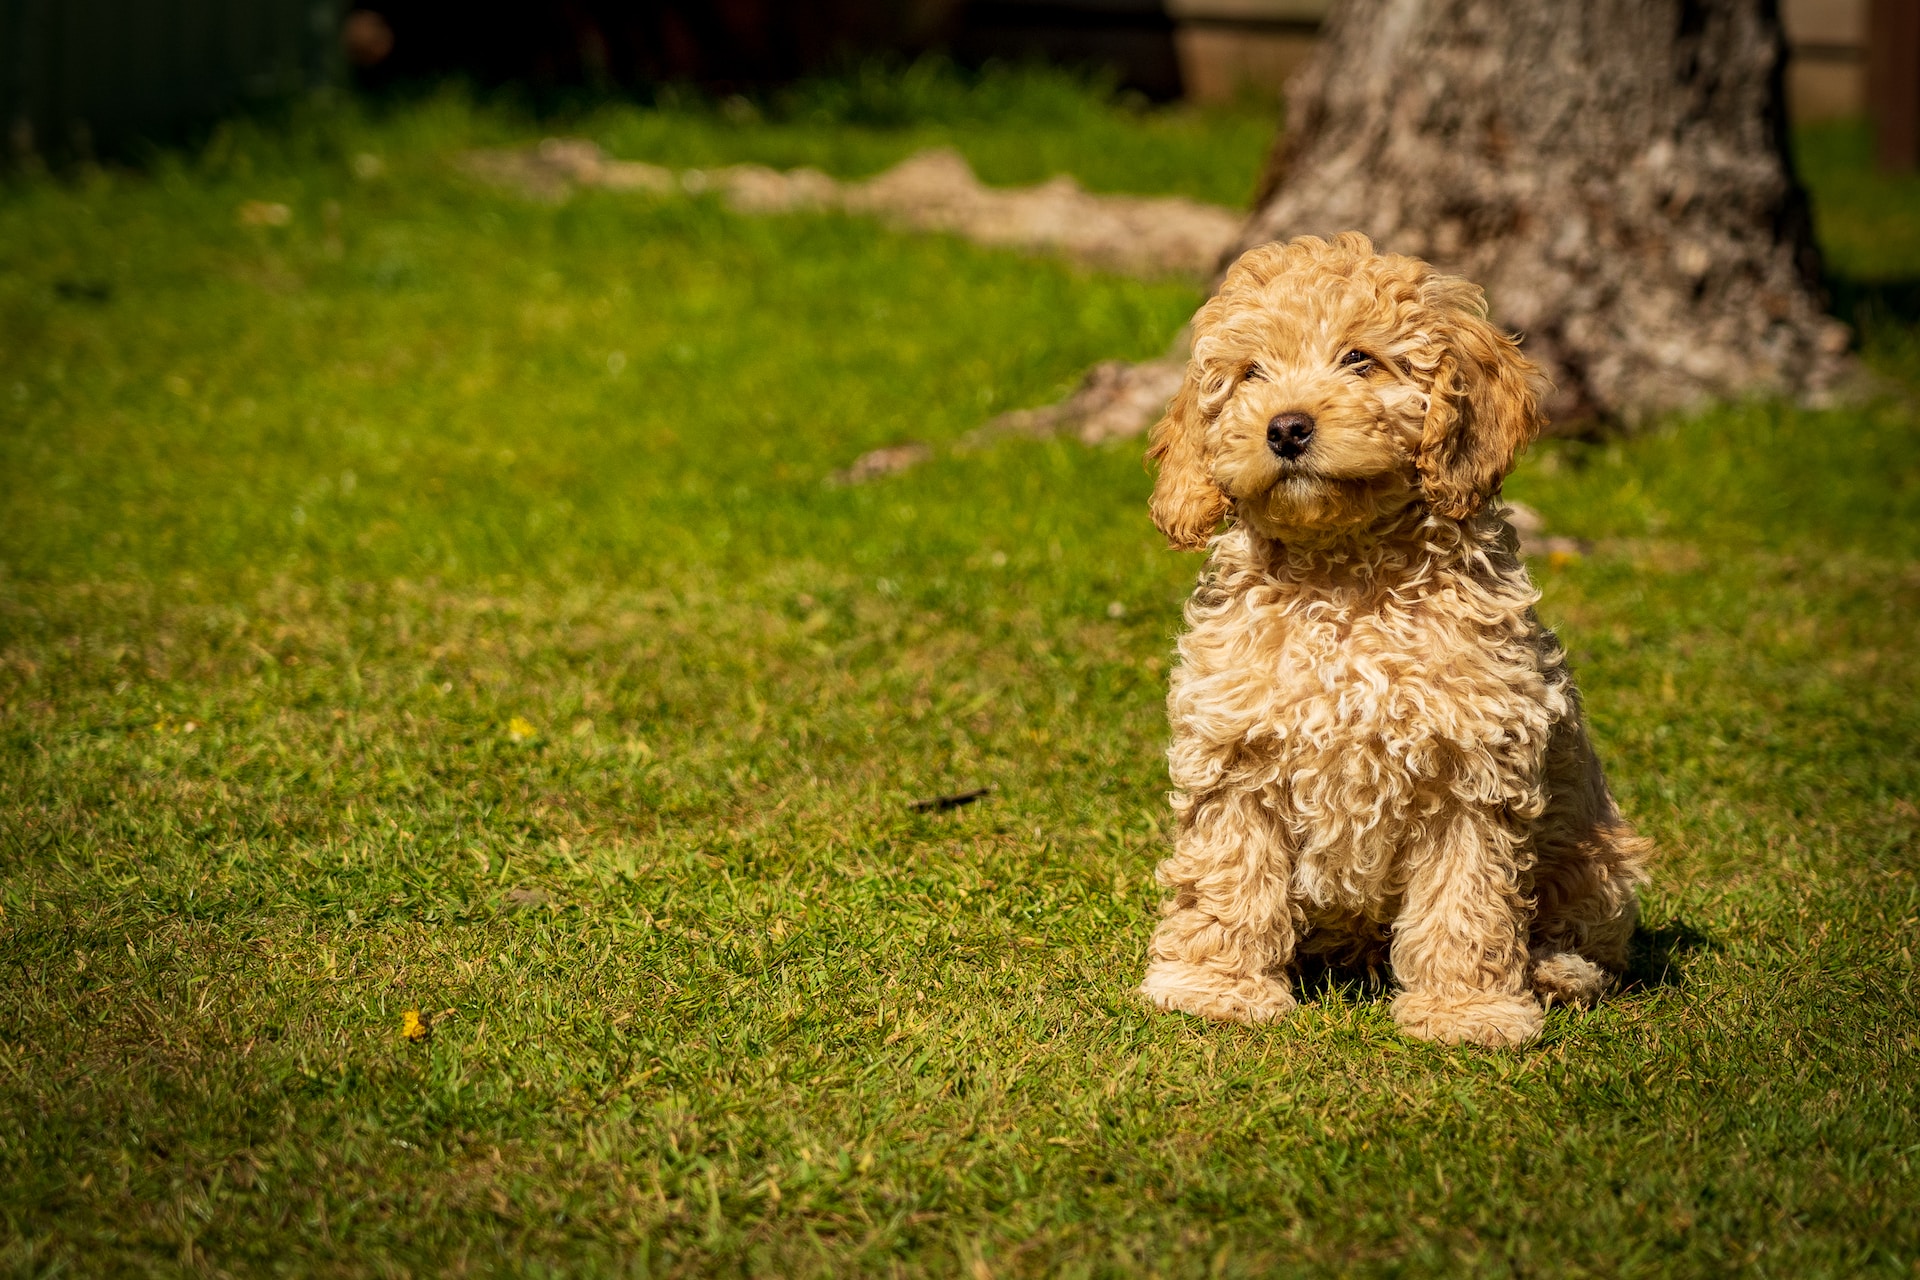 Cockapoo on green grass field during daytime